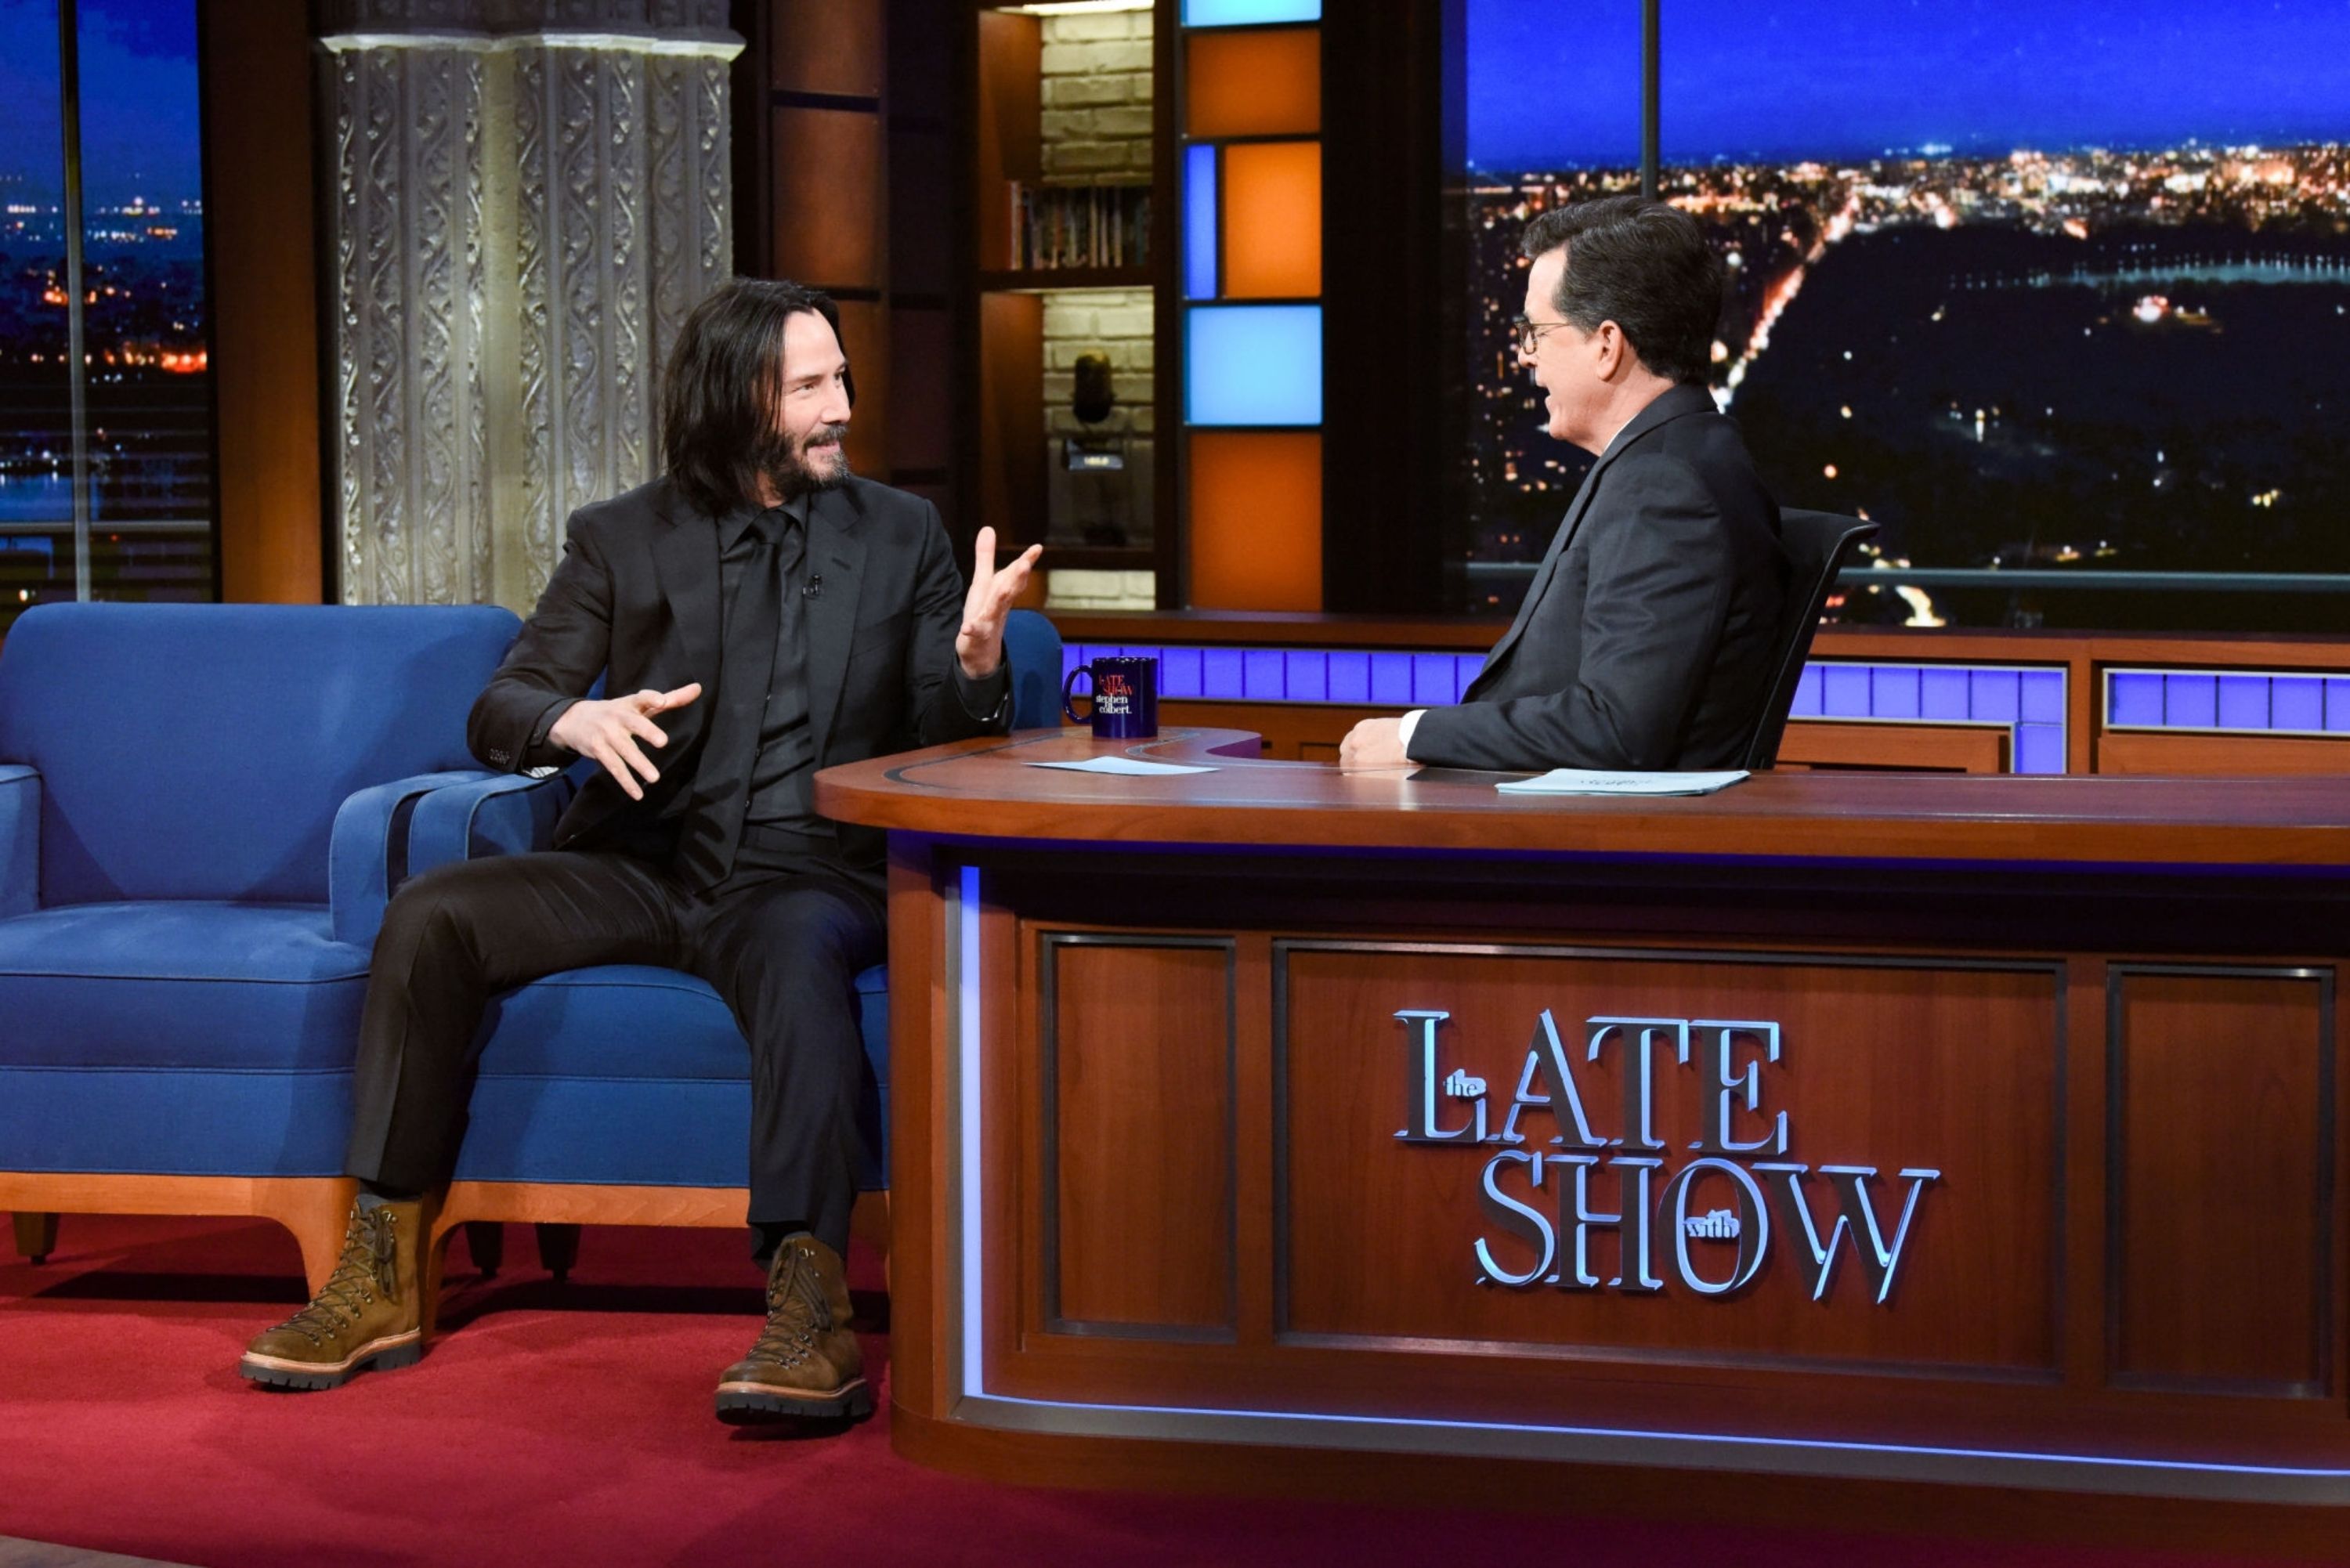 2019-05-08-The-Late-Show-With-Stephen-Colbert-Stills-002.jpg